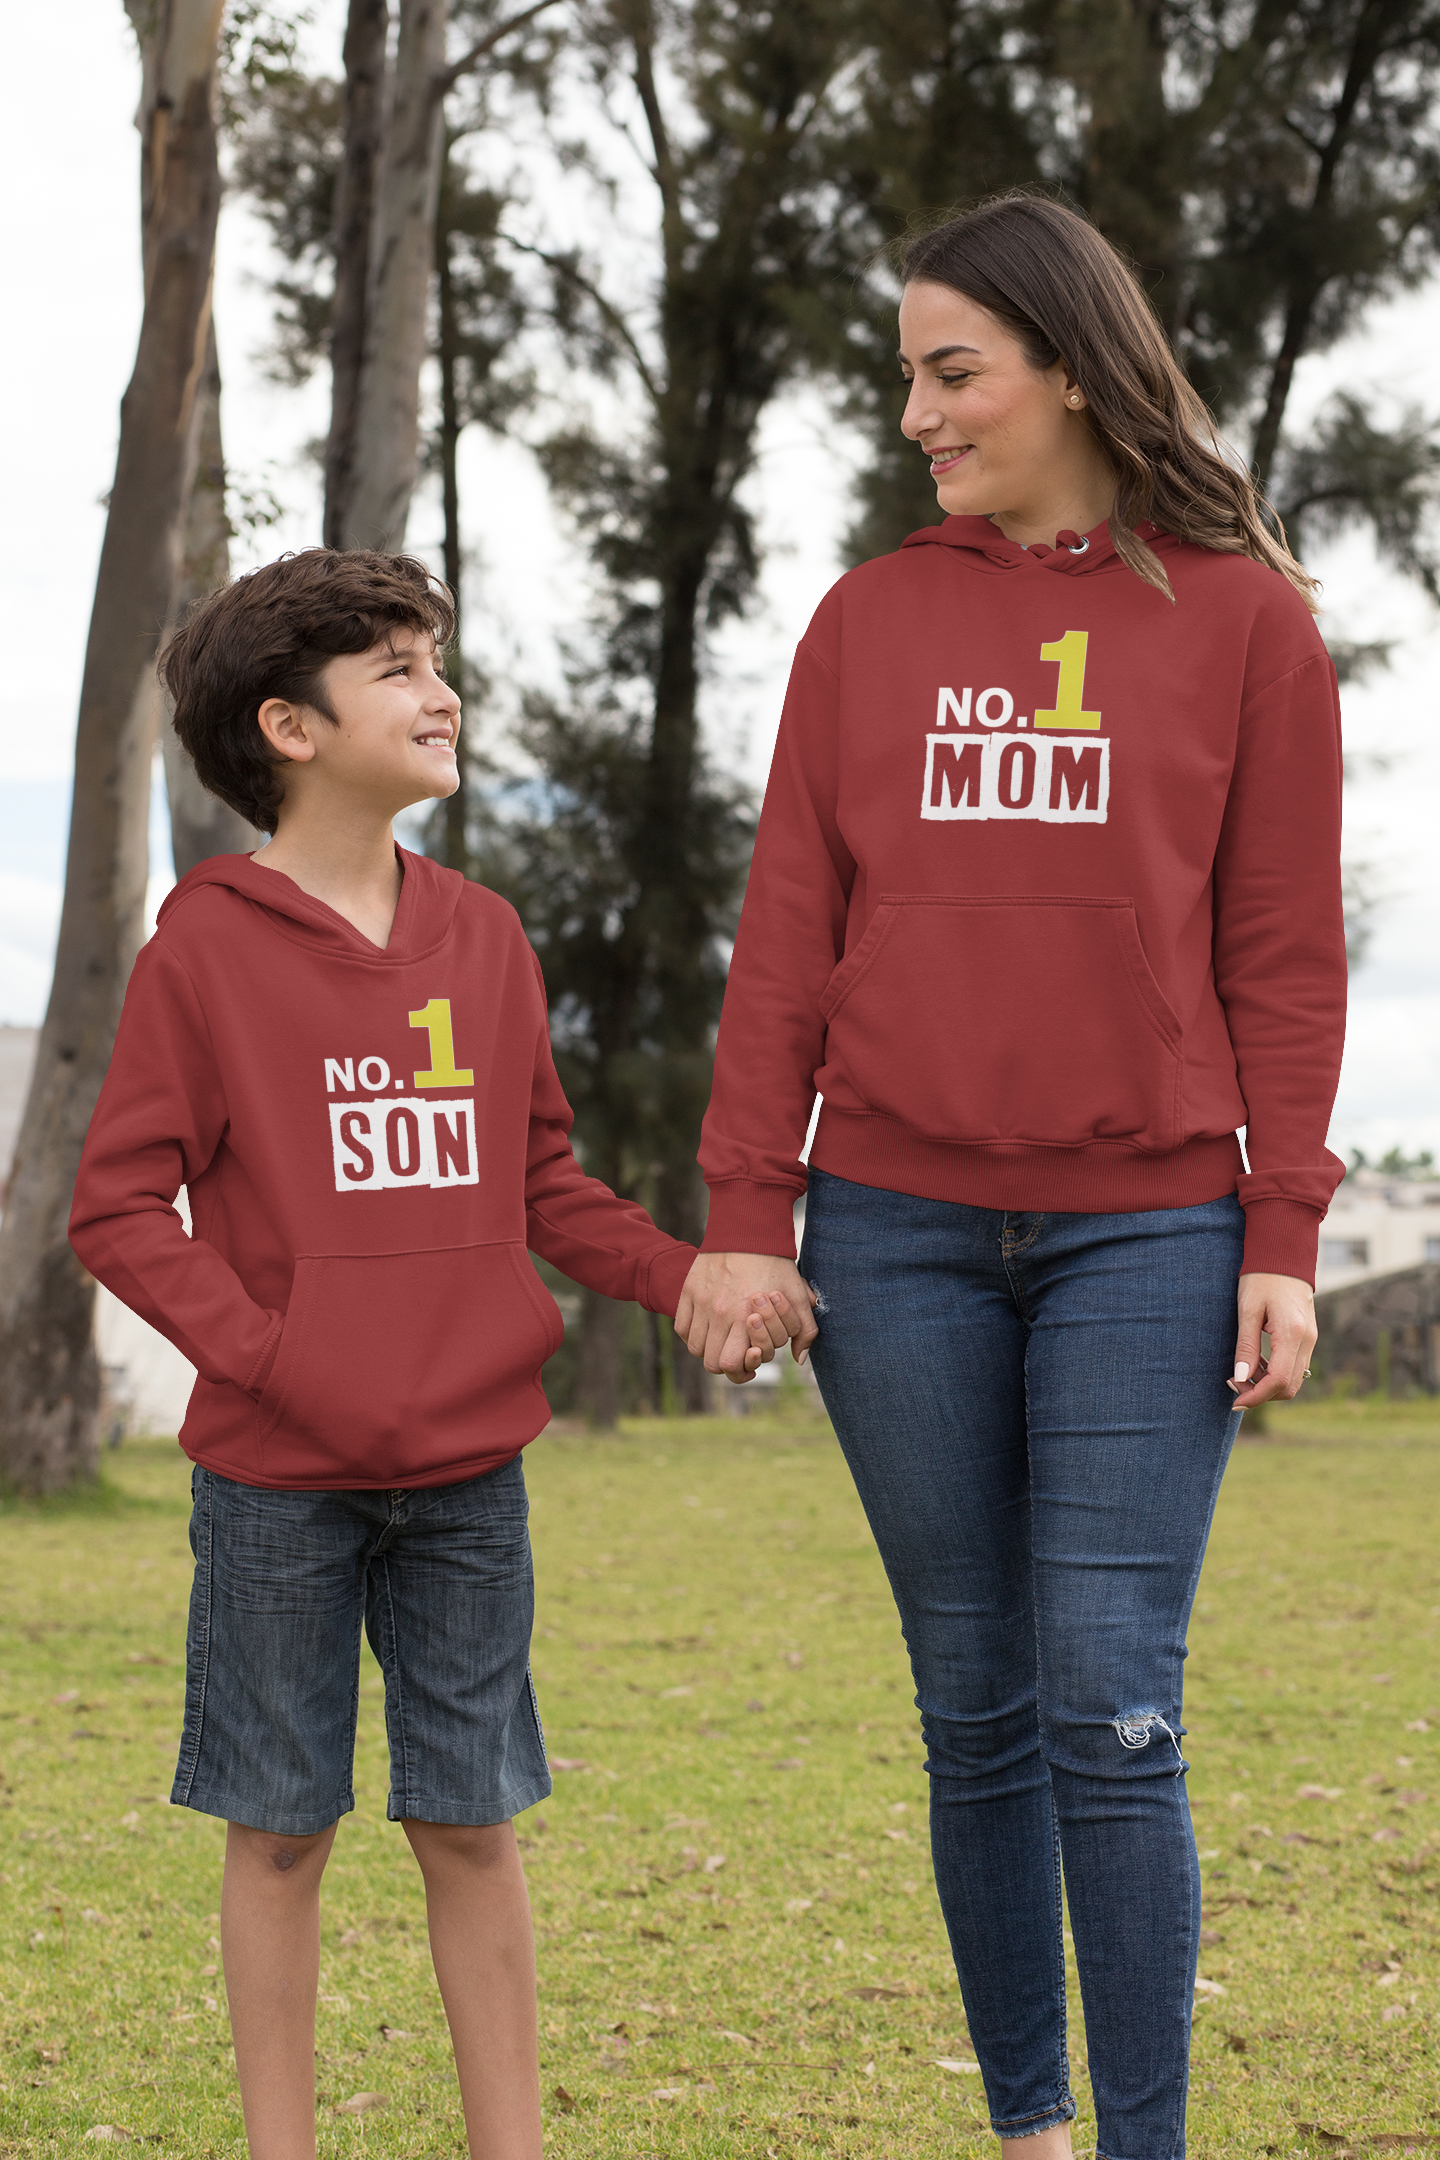 No 1 Son Mother And Son Red Matching Hoodies- FunkyTradition